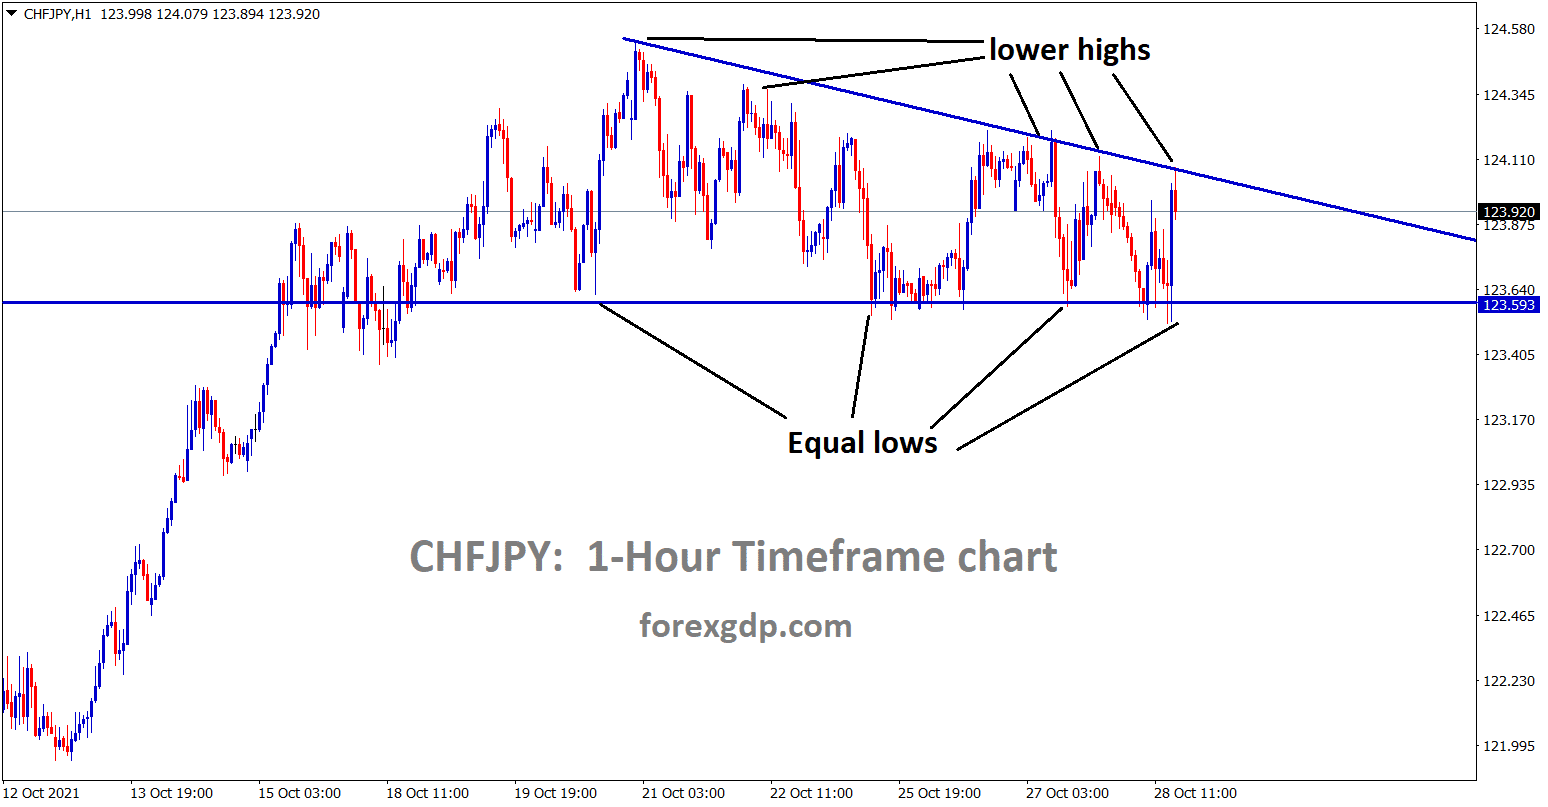 CHFJPY is moving in a descending triangle triangle pattern